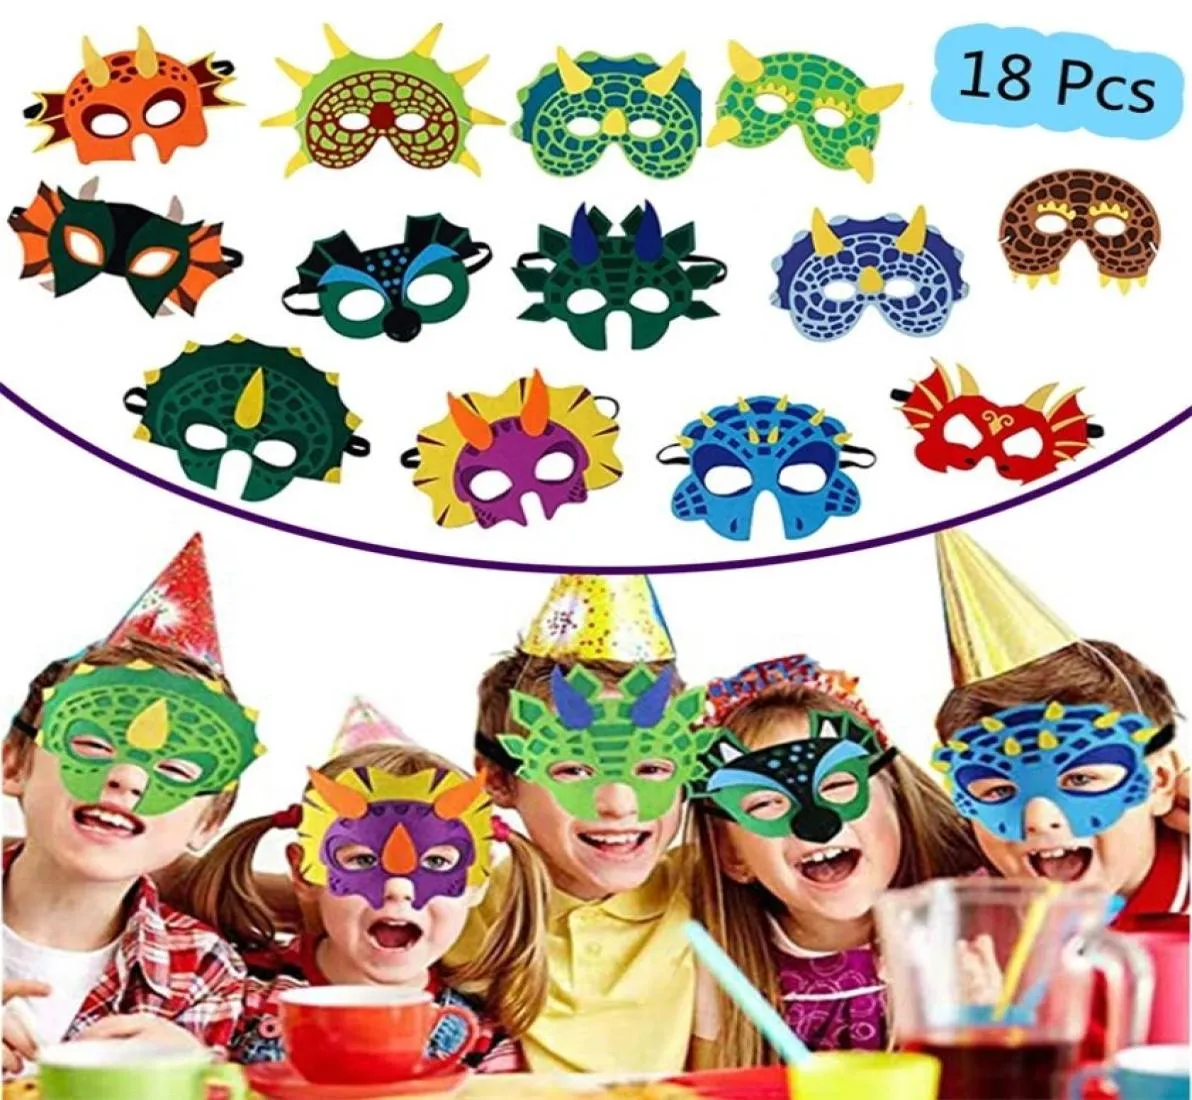 681218 PCS Dinosaur Party Masks Elastic and Felt Child Maques Dragon Face Mask For Kids Themed Masquerade Halloween Gift 22074979873